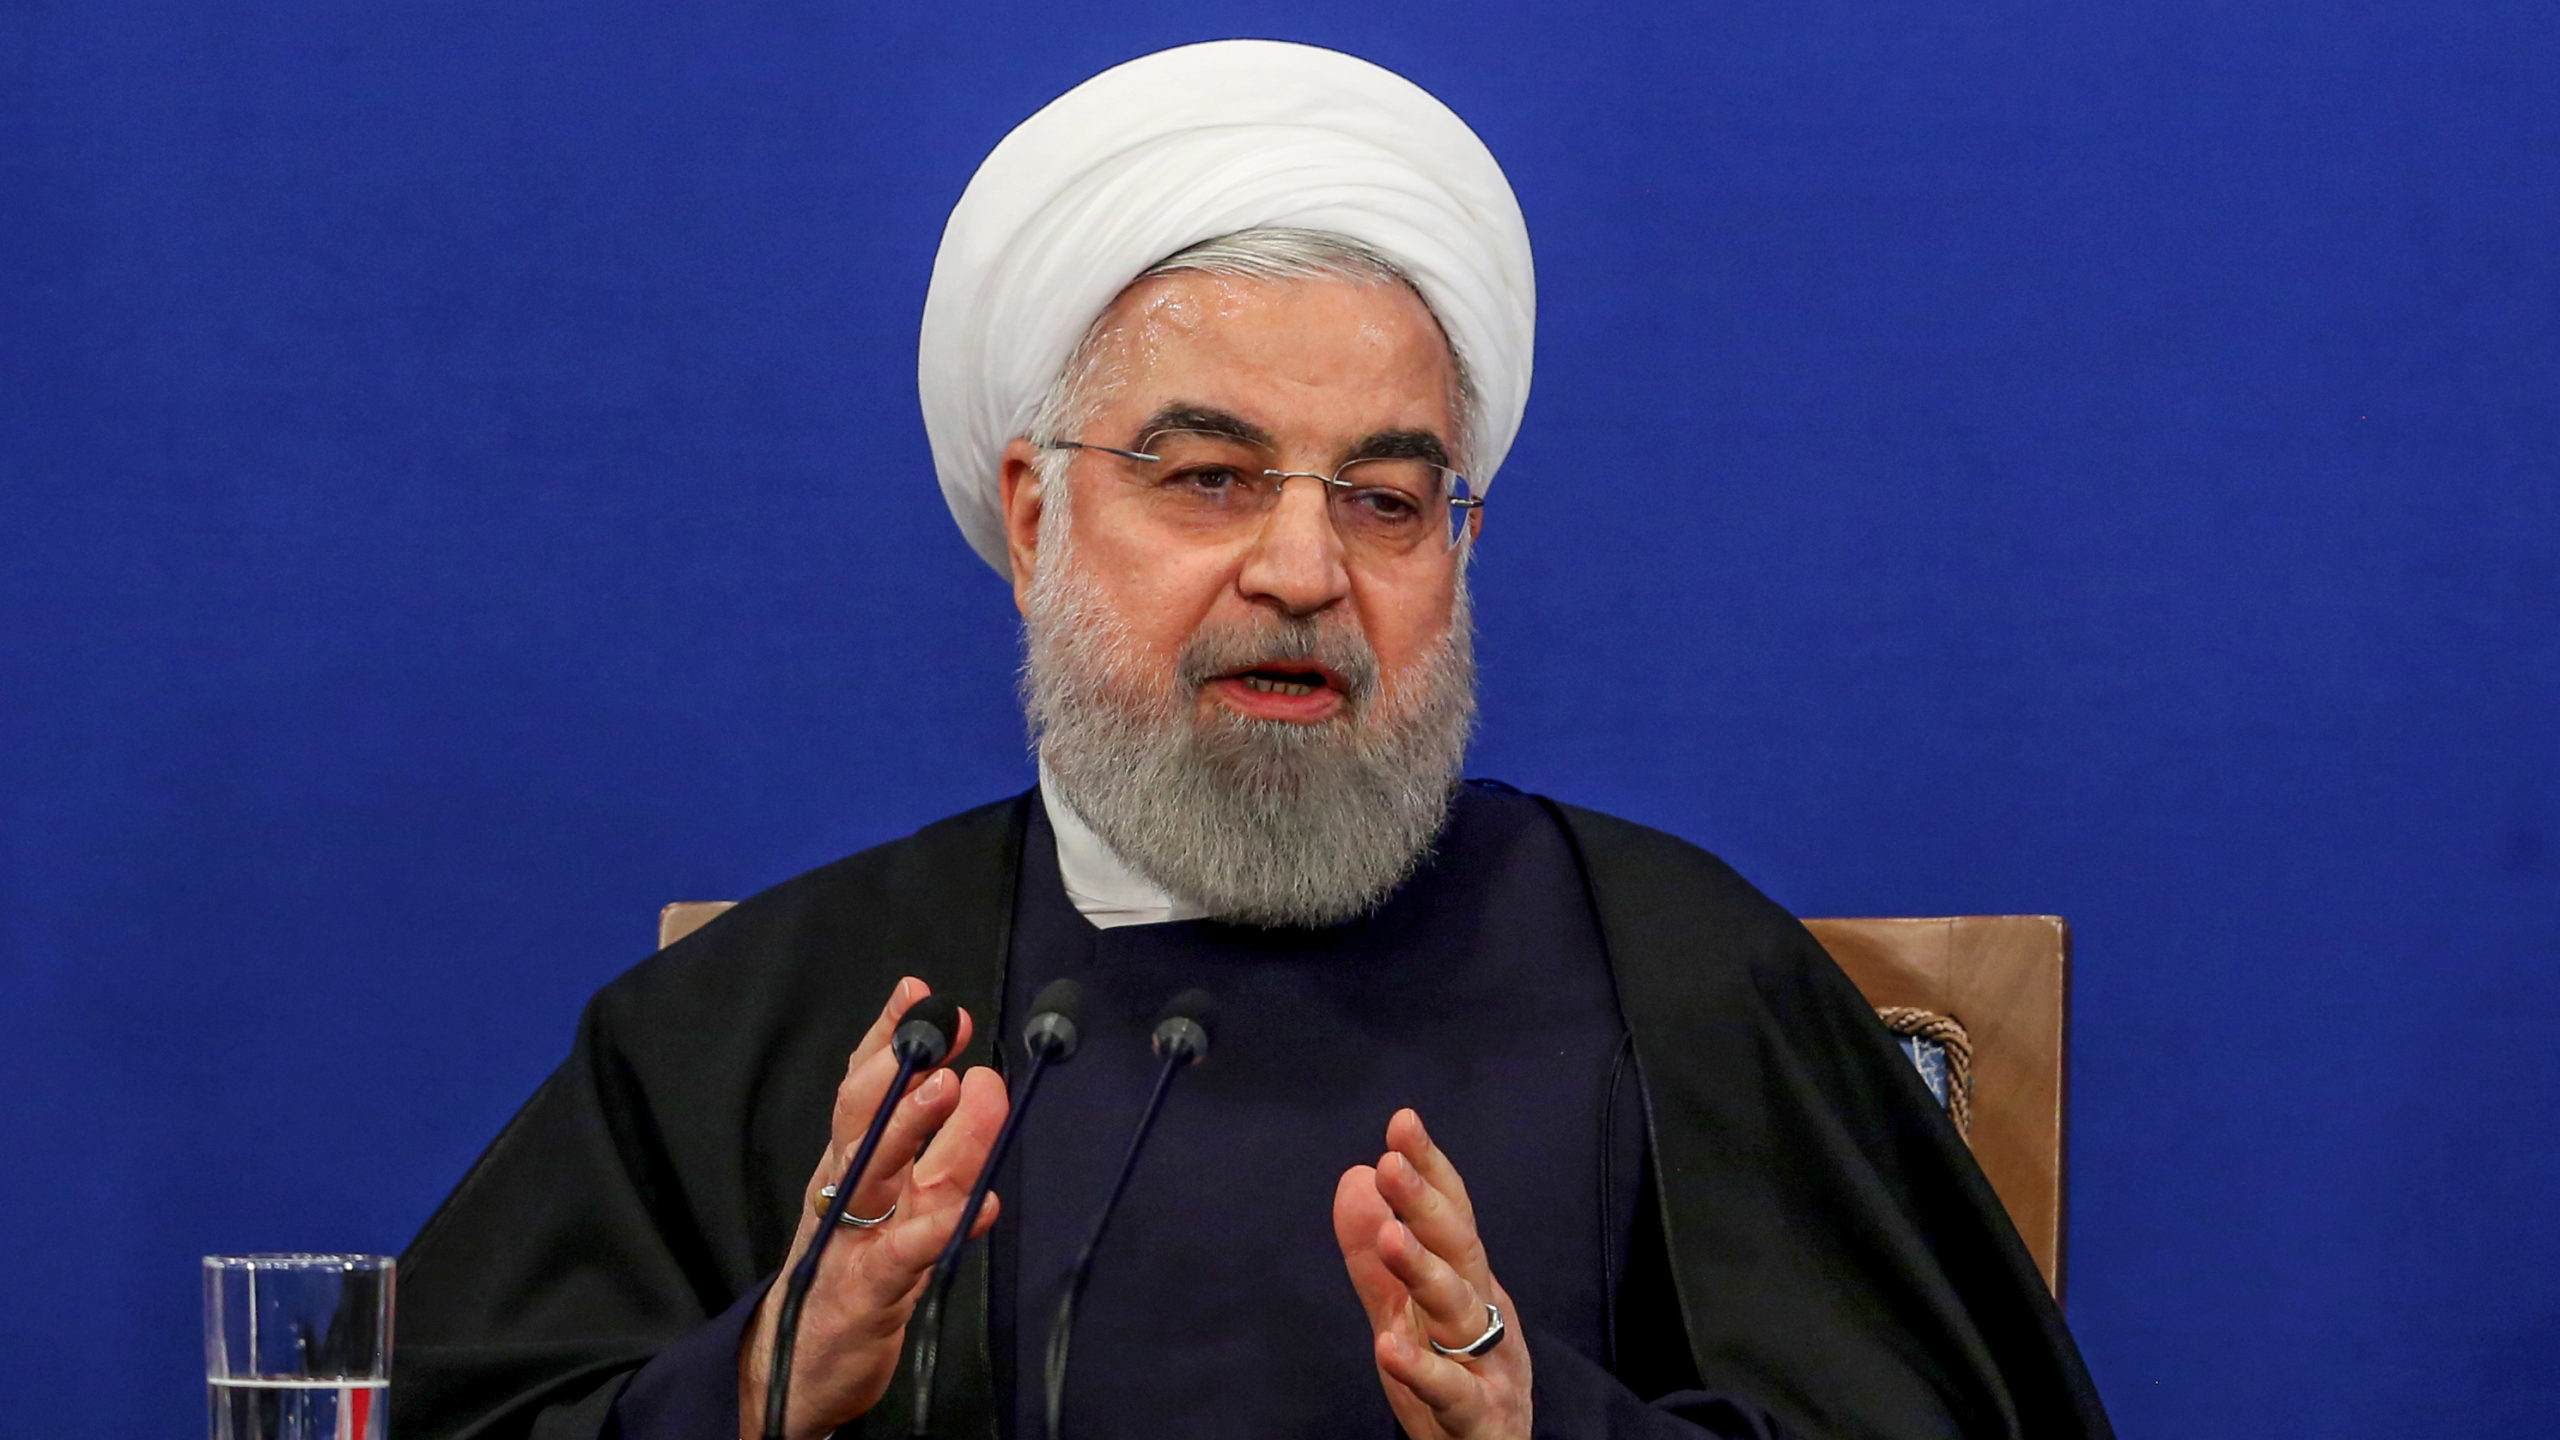 Rouhani: Iran Will Not Be Pressured Into Talks With US